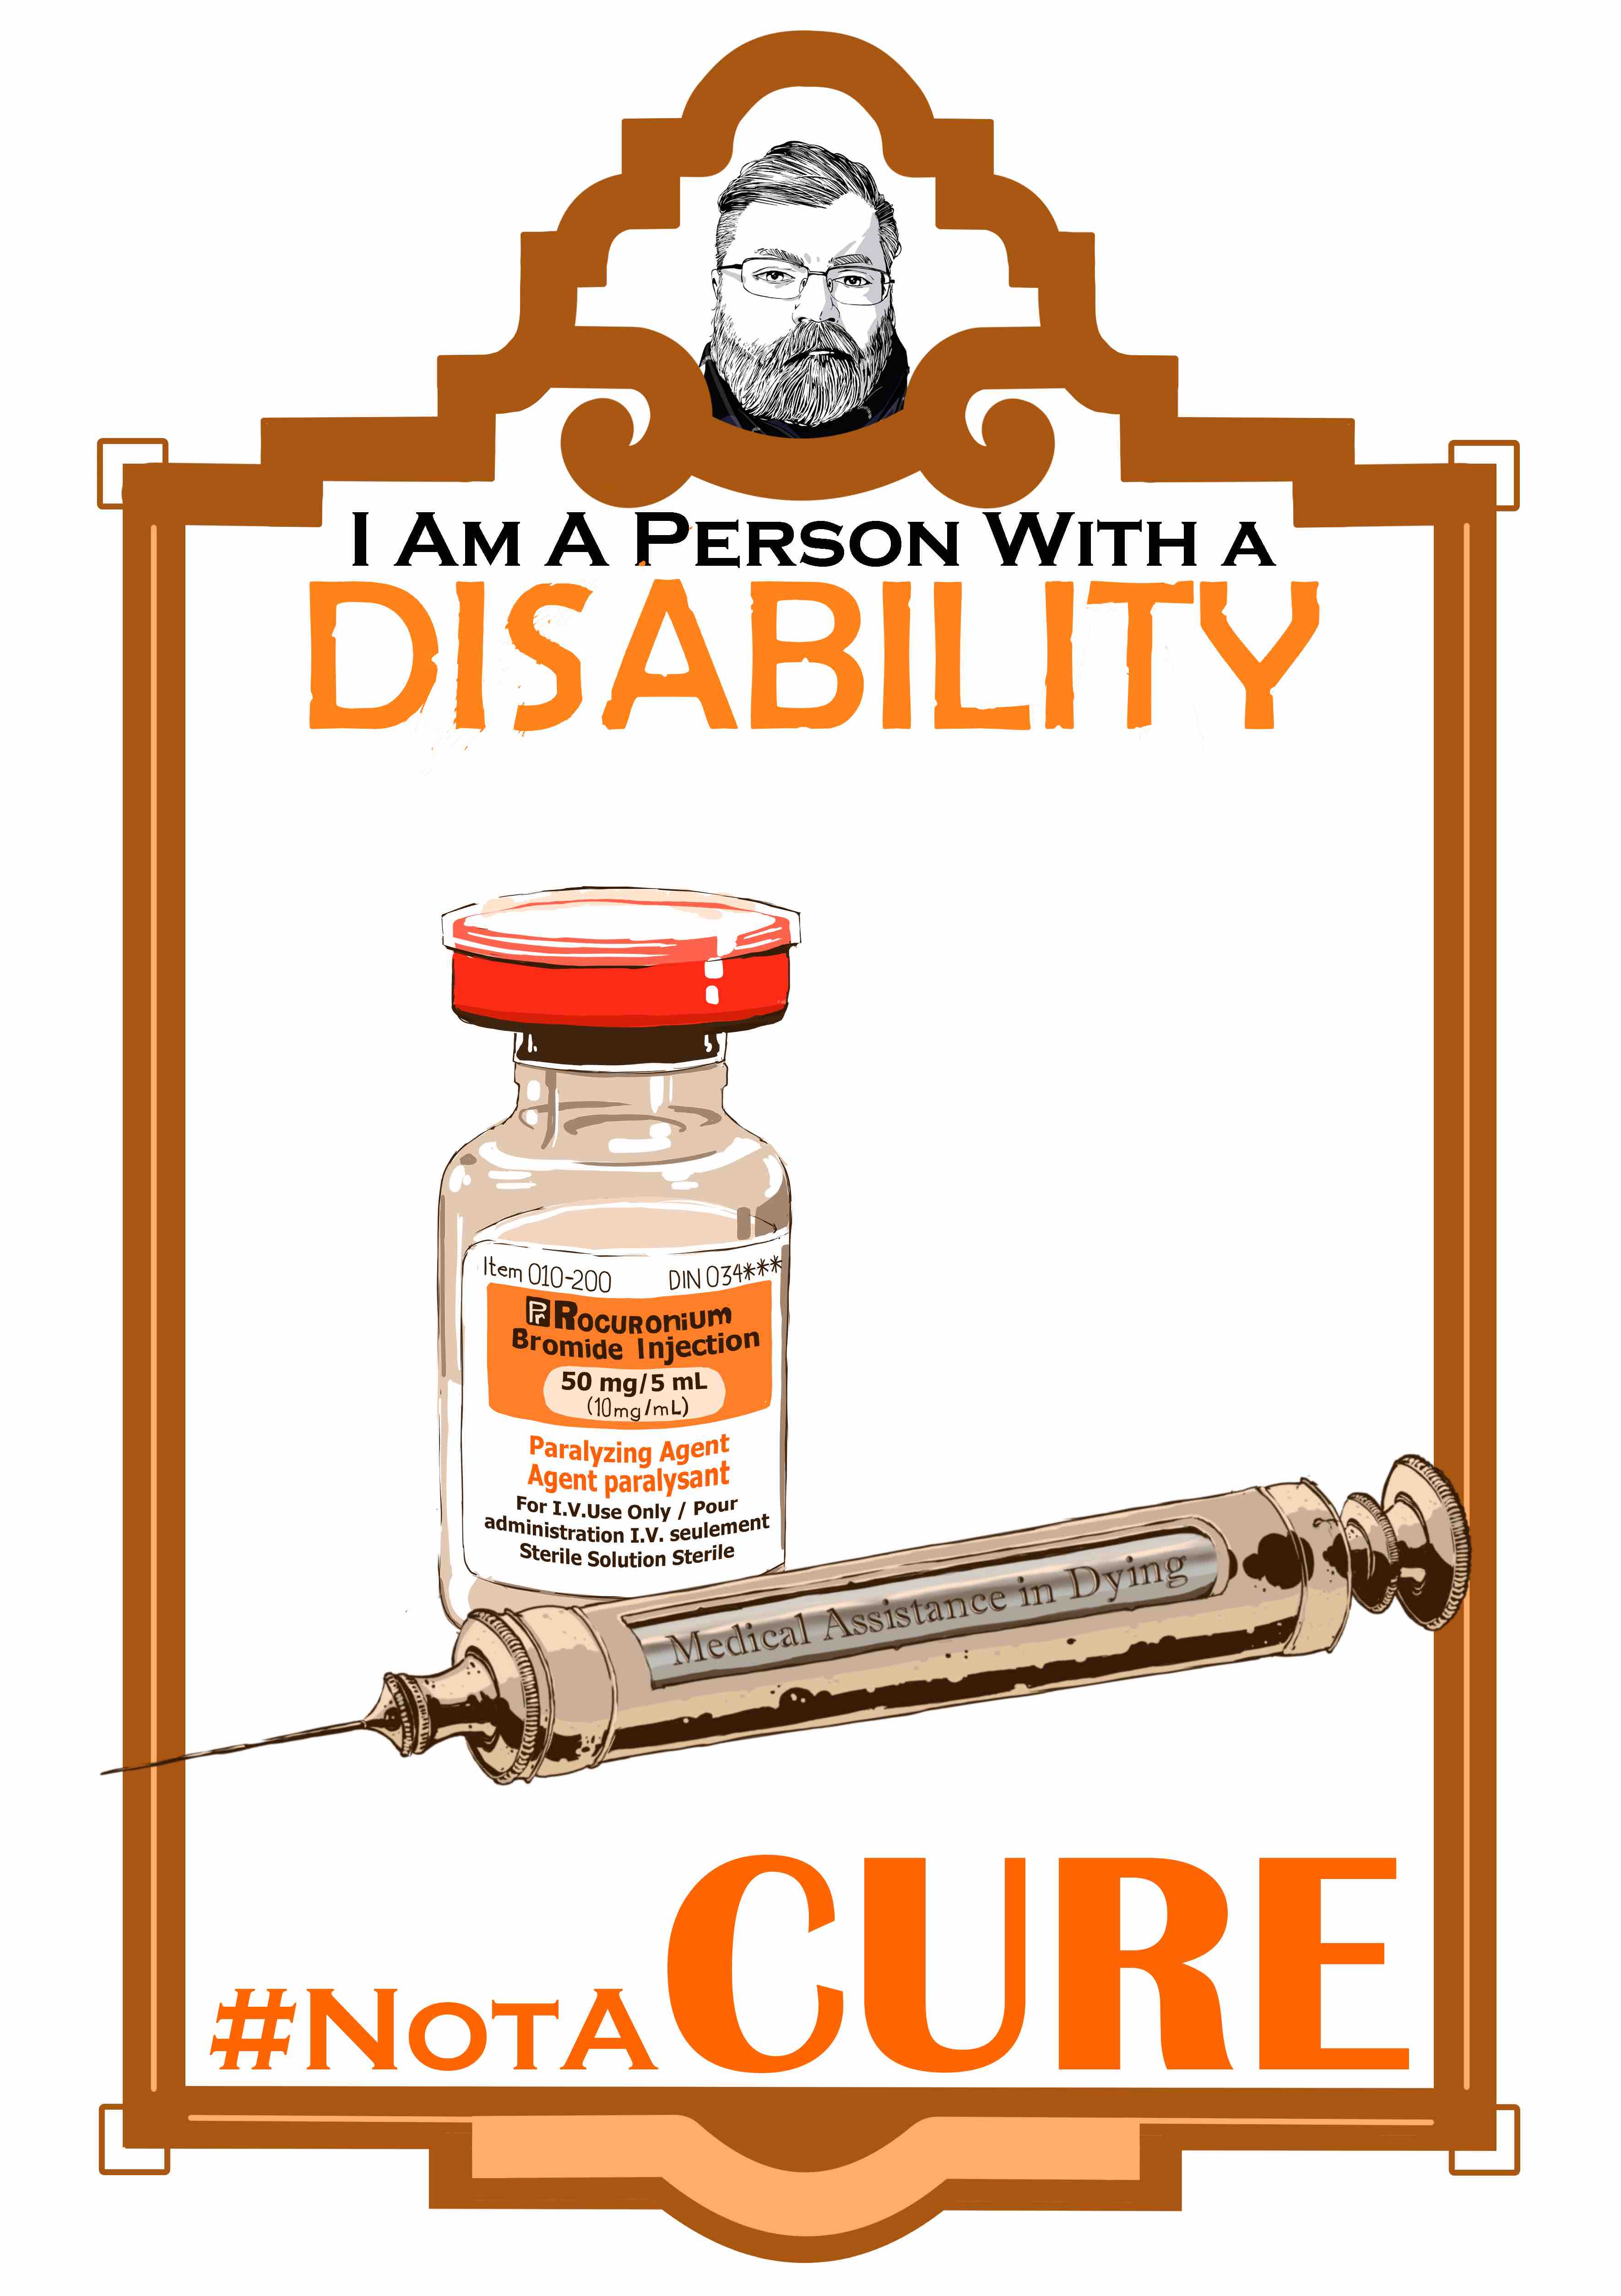 An illustration of A vial of Rocuronium Bromide in orange with a Victorian era syringe engraved with the words,” Medical Assistance in Dying.” In an art deco frame. The frame consists of a small marquee at the top with an image of the artist and the main image below. The text “I am a person with a disability.’ Sits at the top of the illustration. The word “Disability” is in all caps and is colored Orange. The text “#Not A Cure” is at the bottom of the illustration with the text in all caps and colored Orange The syringe is metal with a glass window at the center of the cylinder. The Vial is clear with a red cap and a white and orange label. The text on the label:” Rocuronium Bromide Injection 50mg/5ml, Paralyzing Agent Paralyzing, For I.V. Use Only / Pour Administration I.V. seulement Sterile Solution Sterile.”